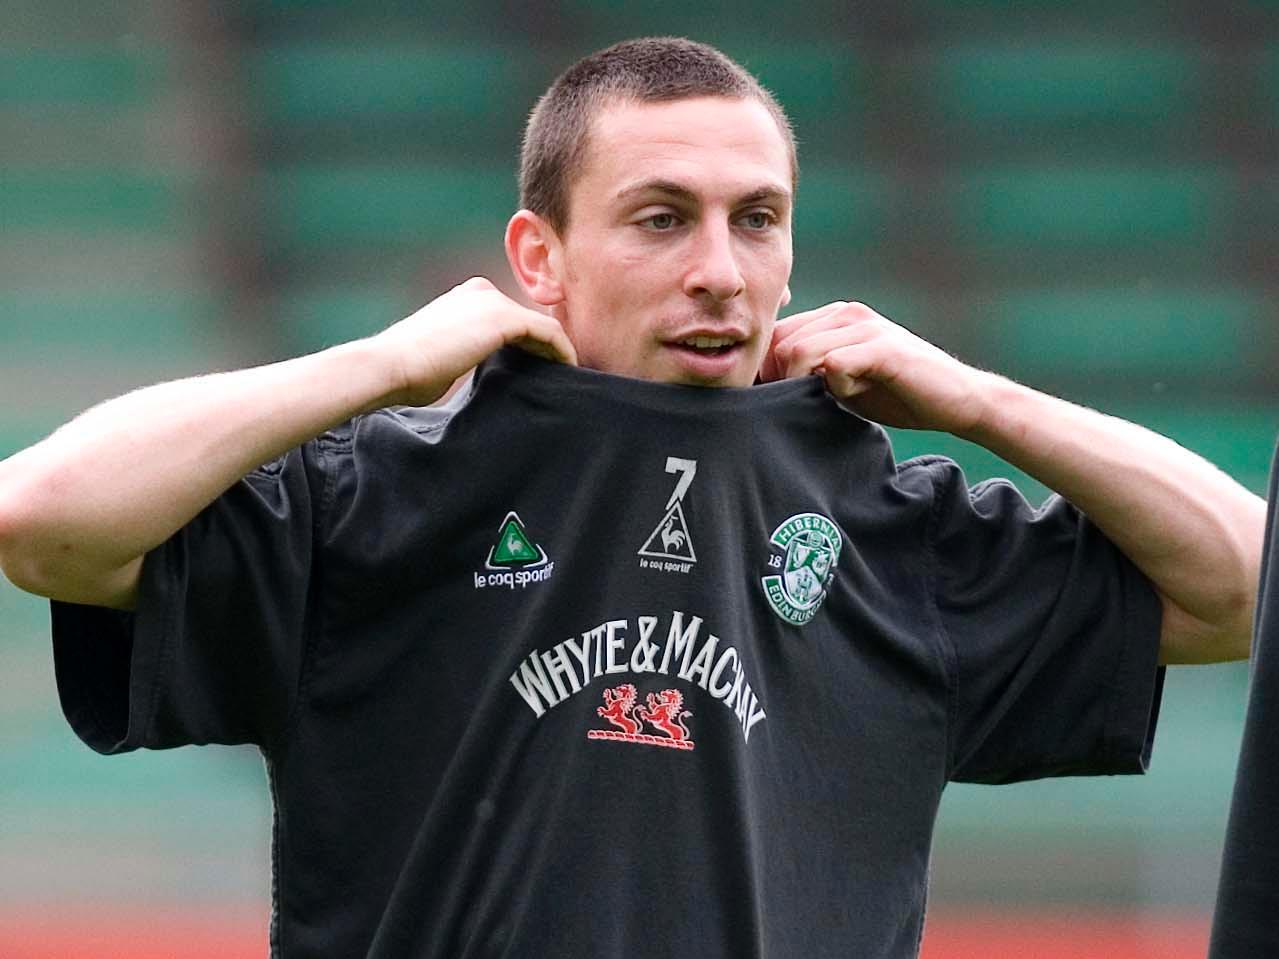 He needs no introduction. Still the captain and leader of the eight-time Ladbrokes Premiership champions, he's closing in on 550 appearances since signing for Celtic back in 2007.